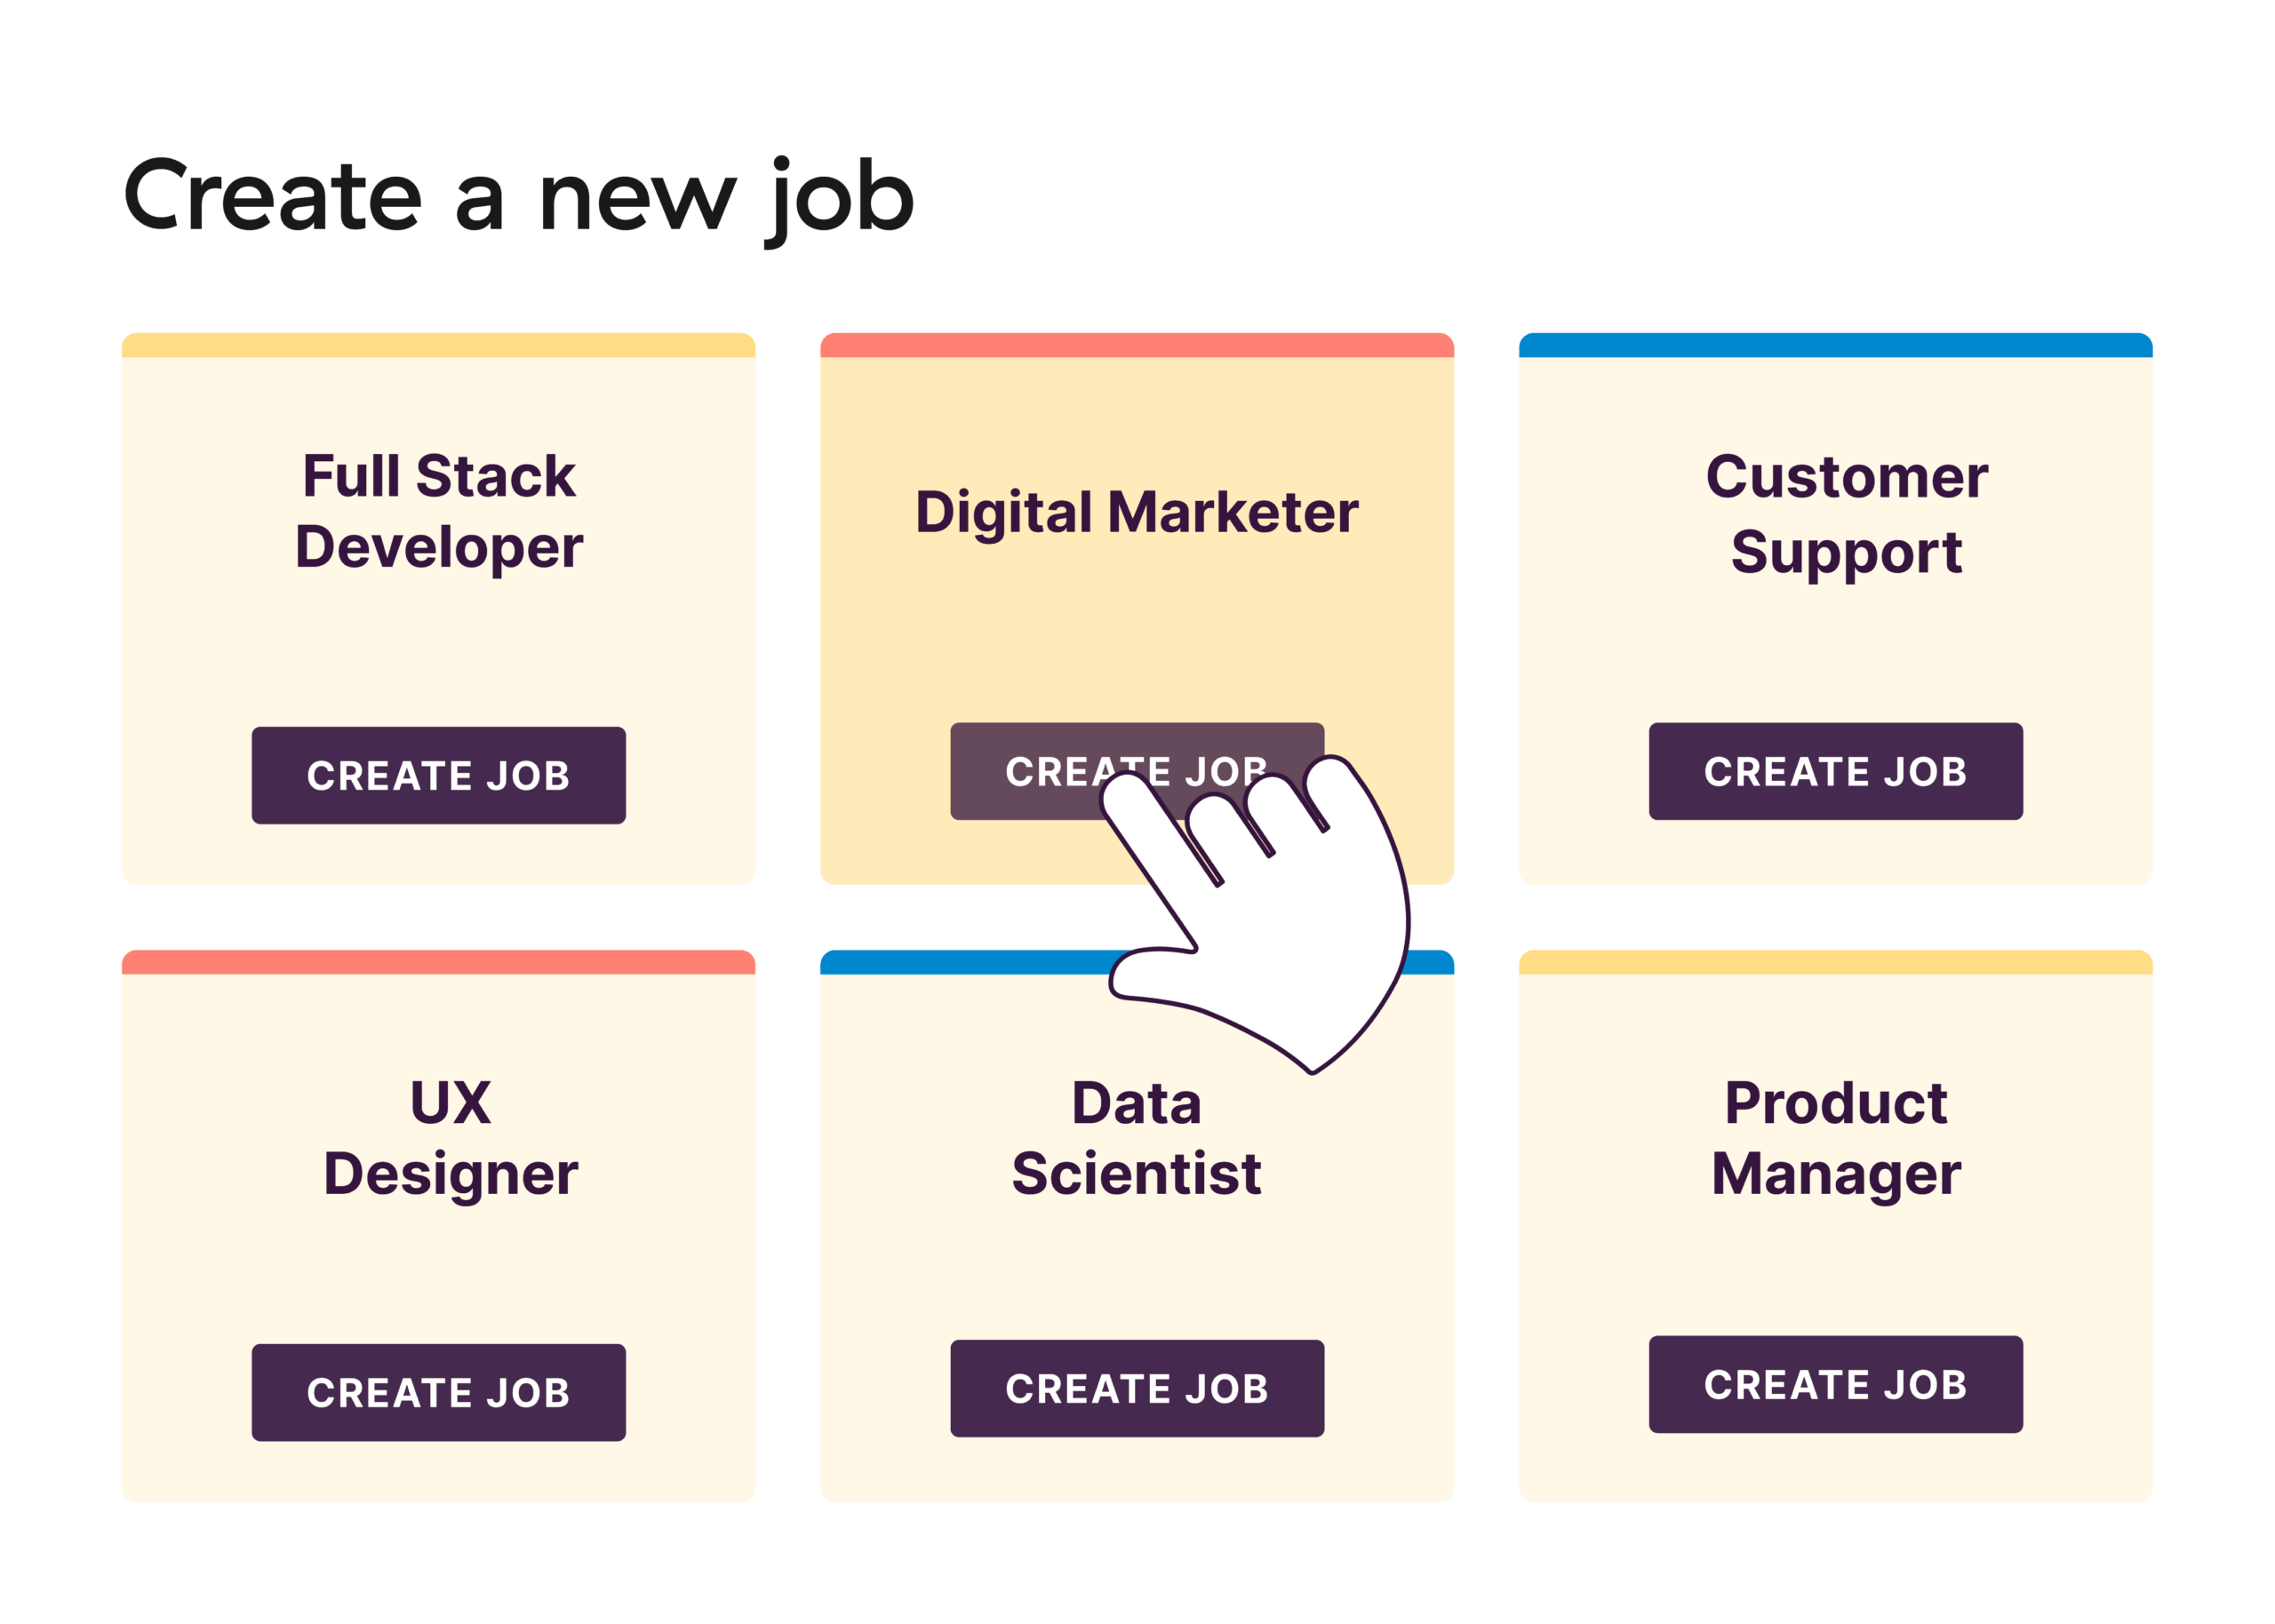 Discover how to qualify talent with skills-based hiring from Toggl Hire